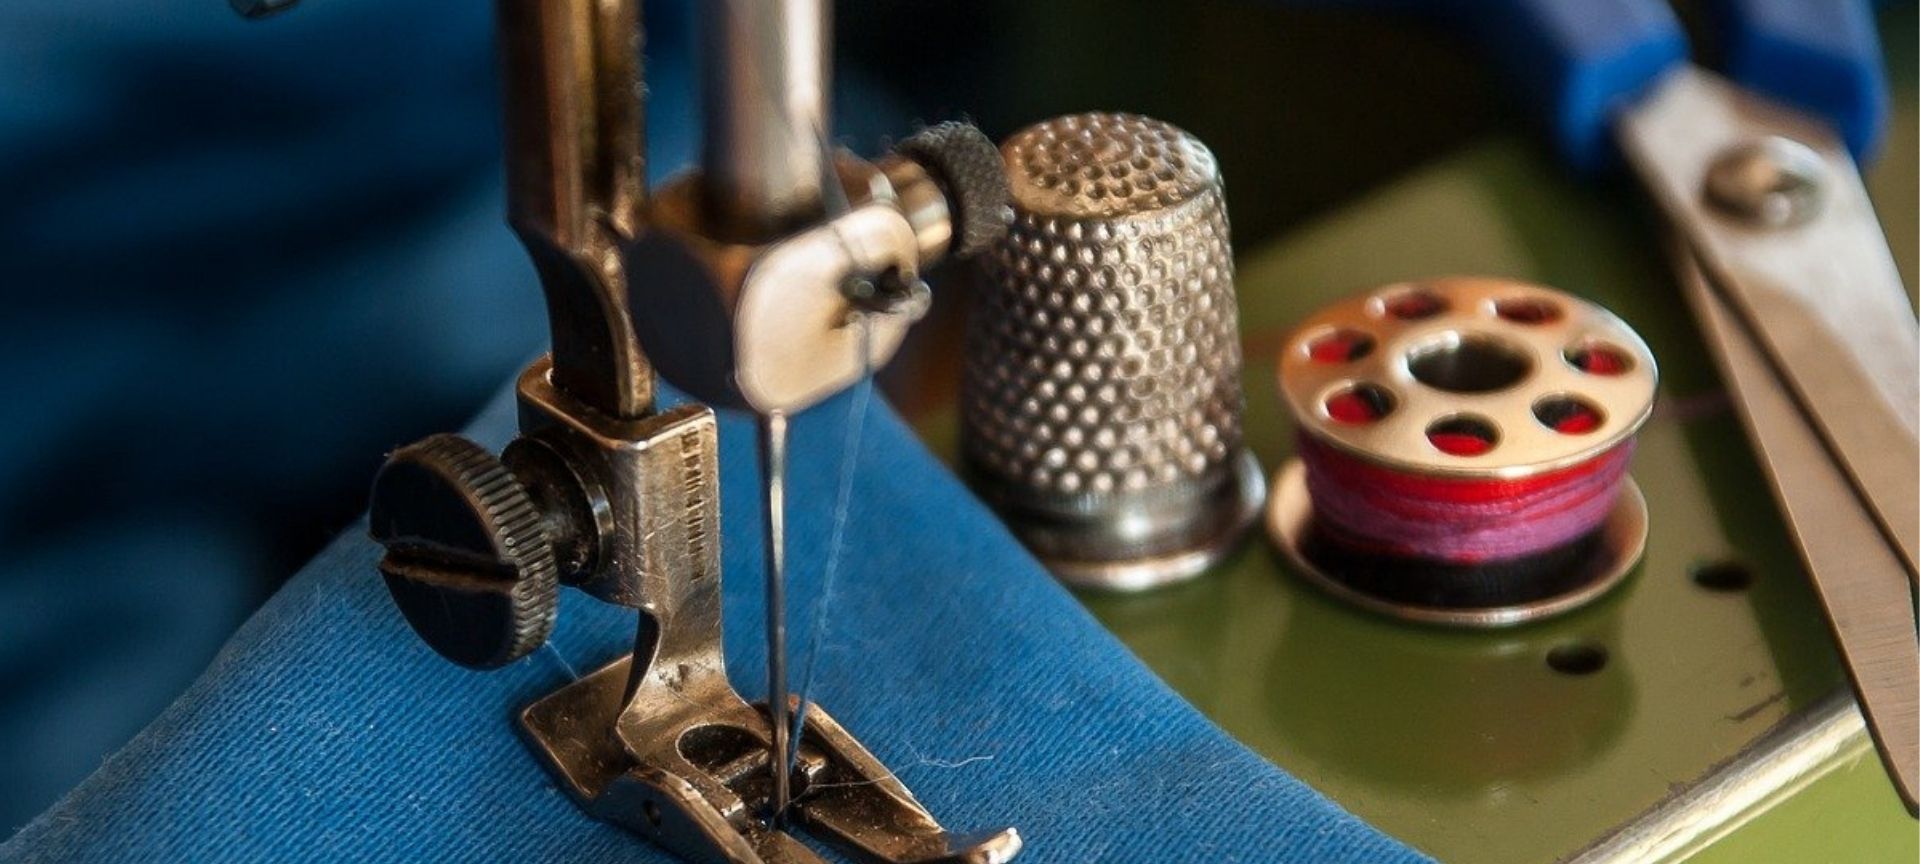 Sewing equipment